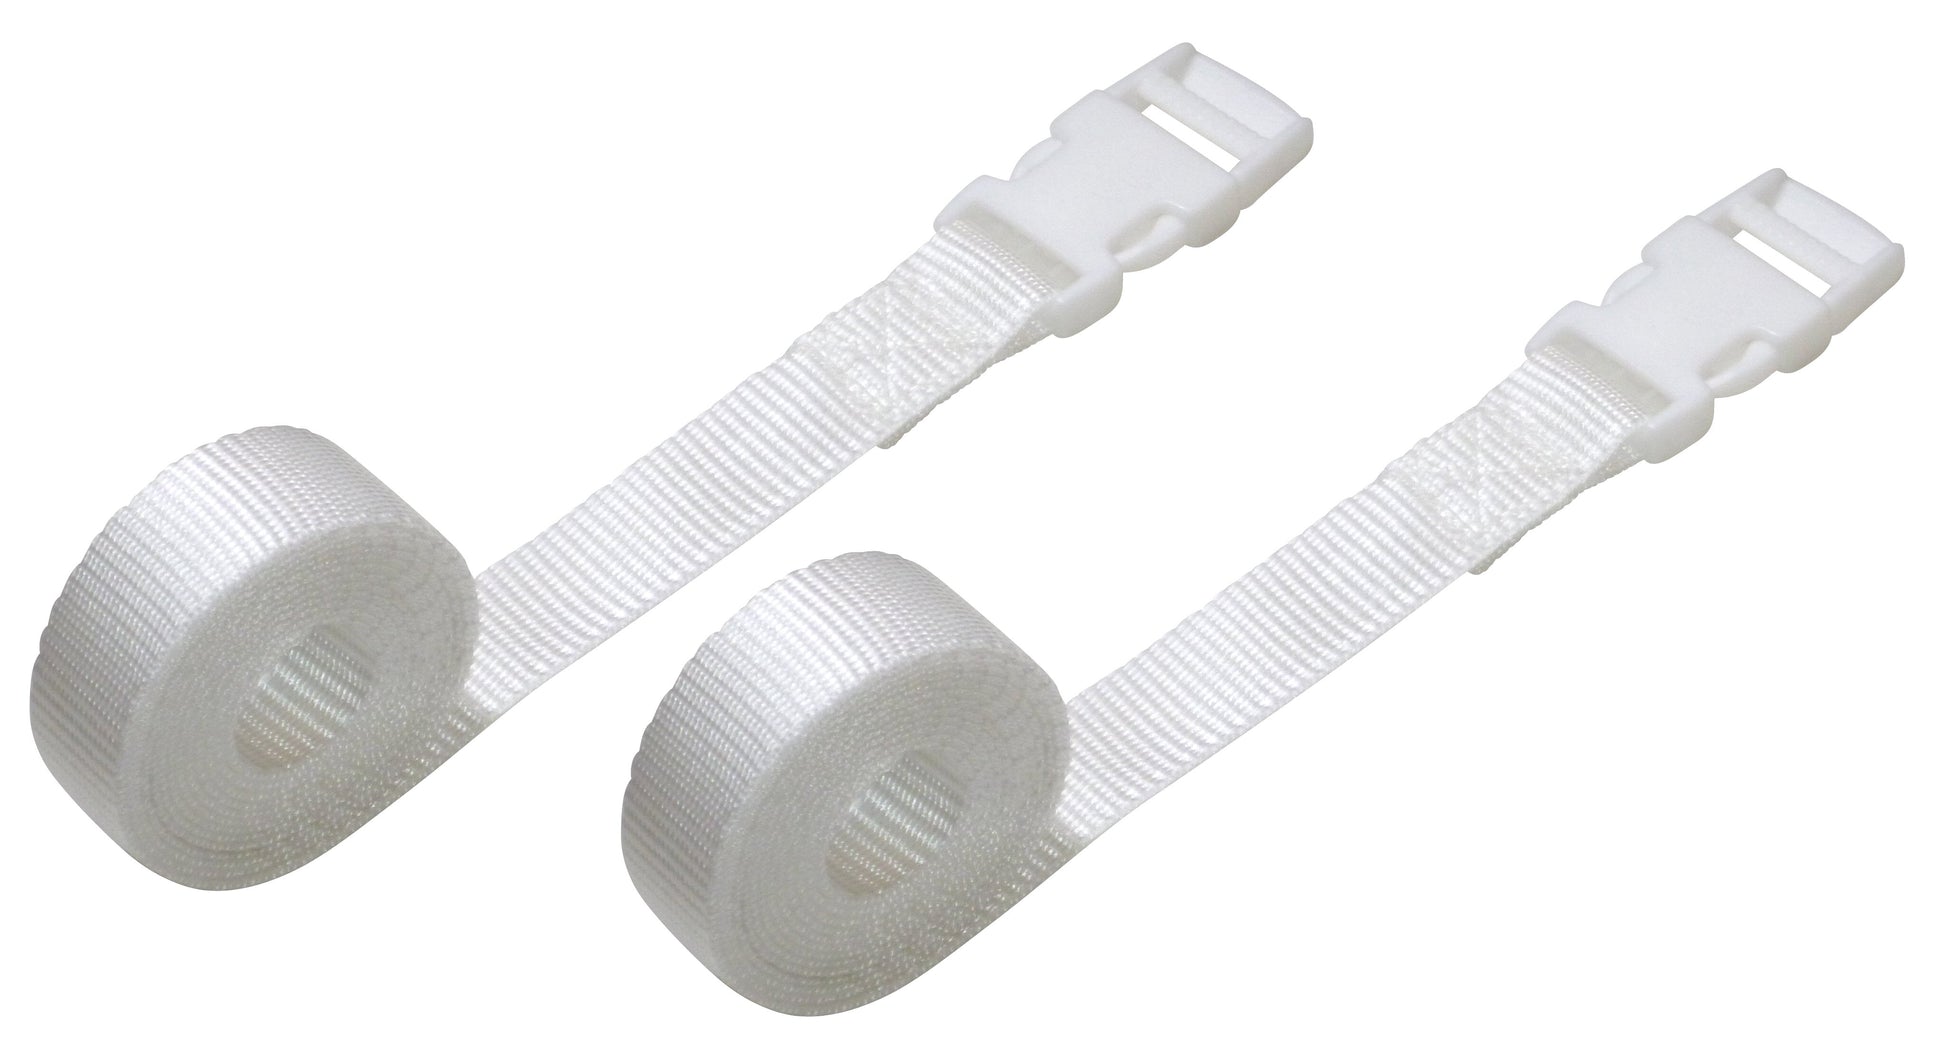 Benristraps 25mm Webbing Strap with Quick Release Buckle (Pair) in white